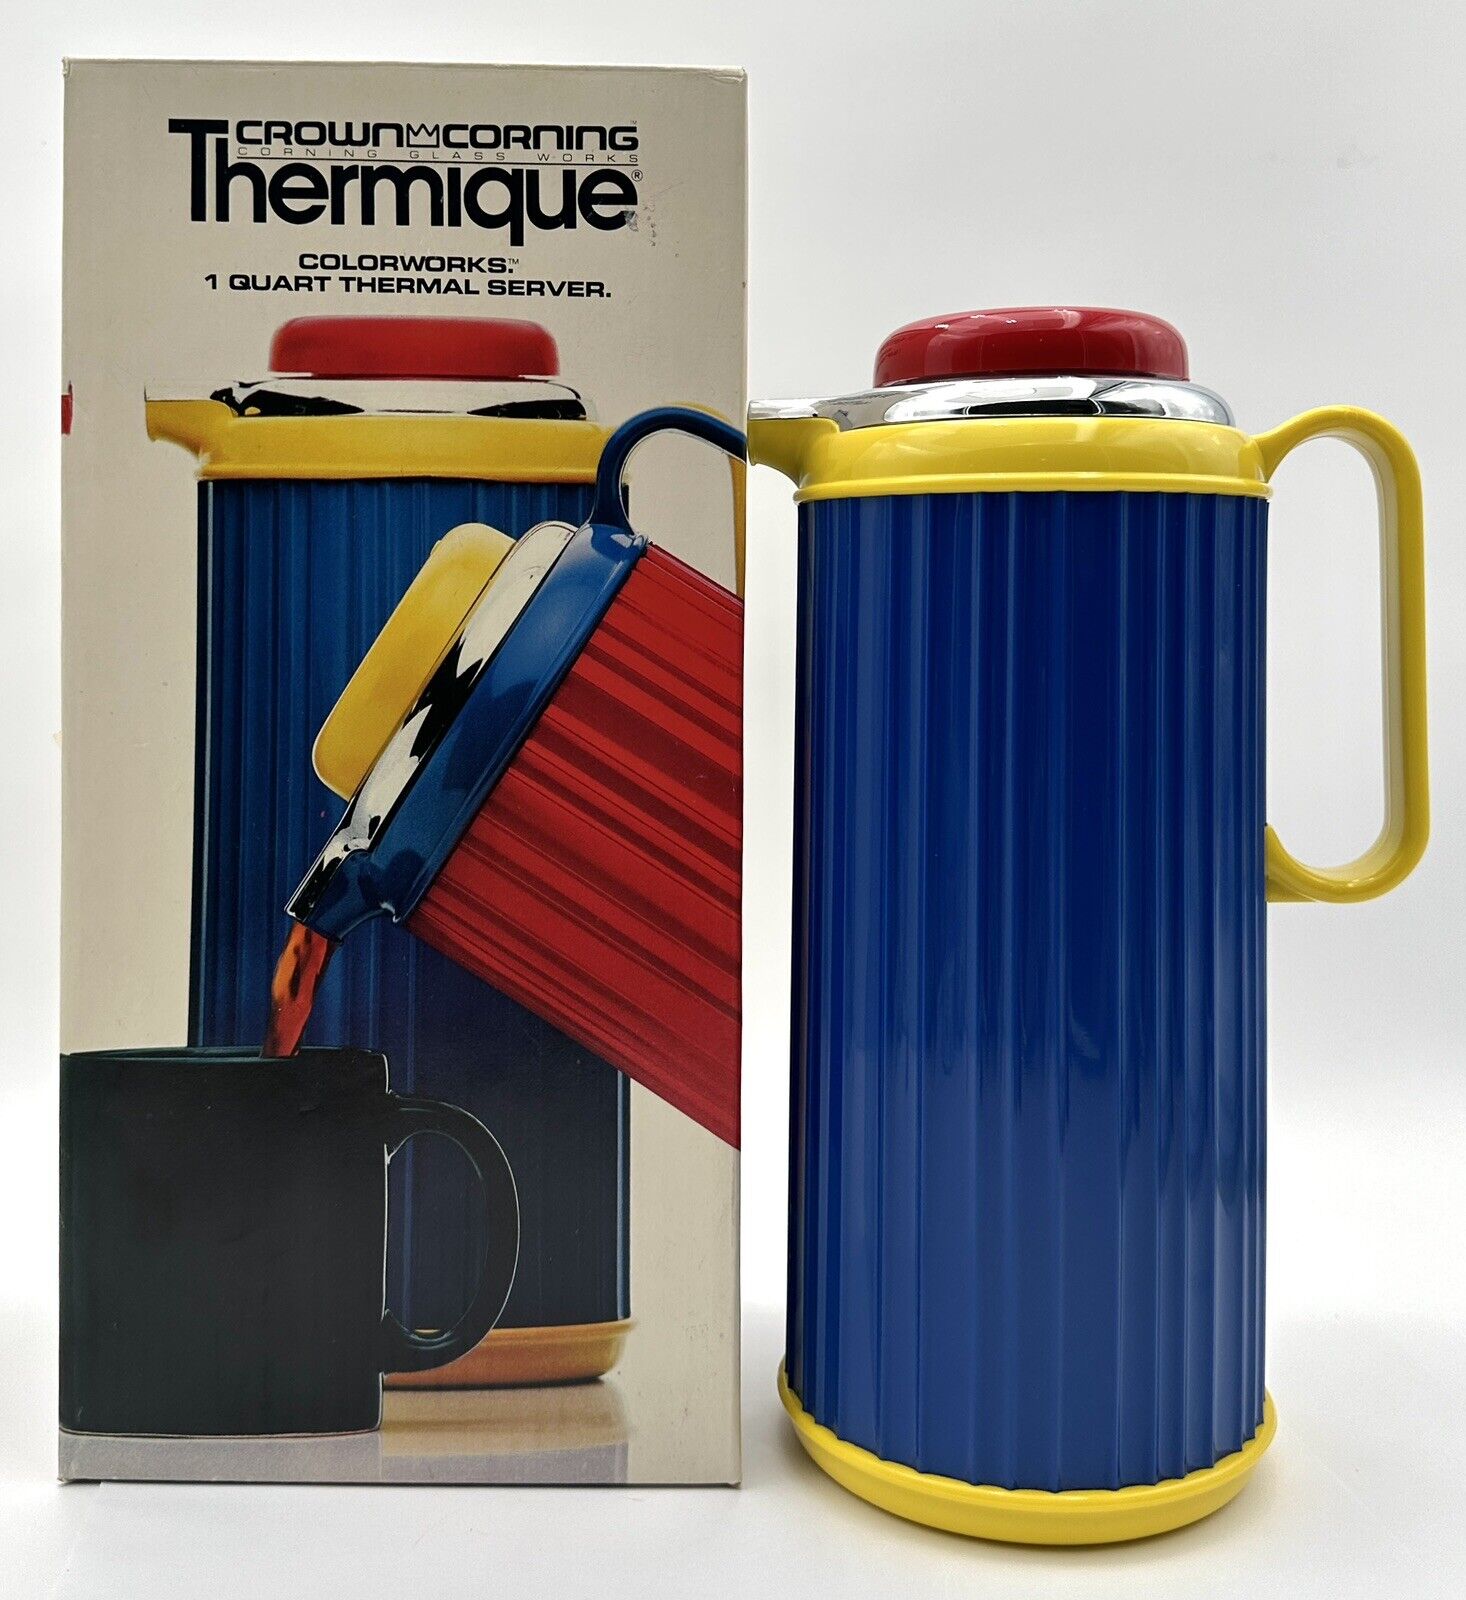 Vintage Thermique Crown Corning Thermos 1 Quart Primary Colors Colorworks 1985